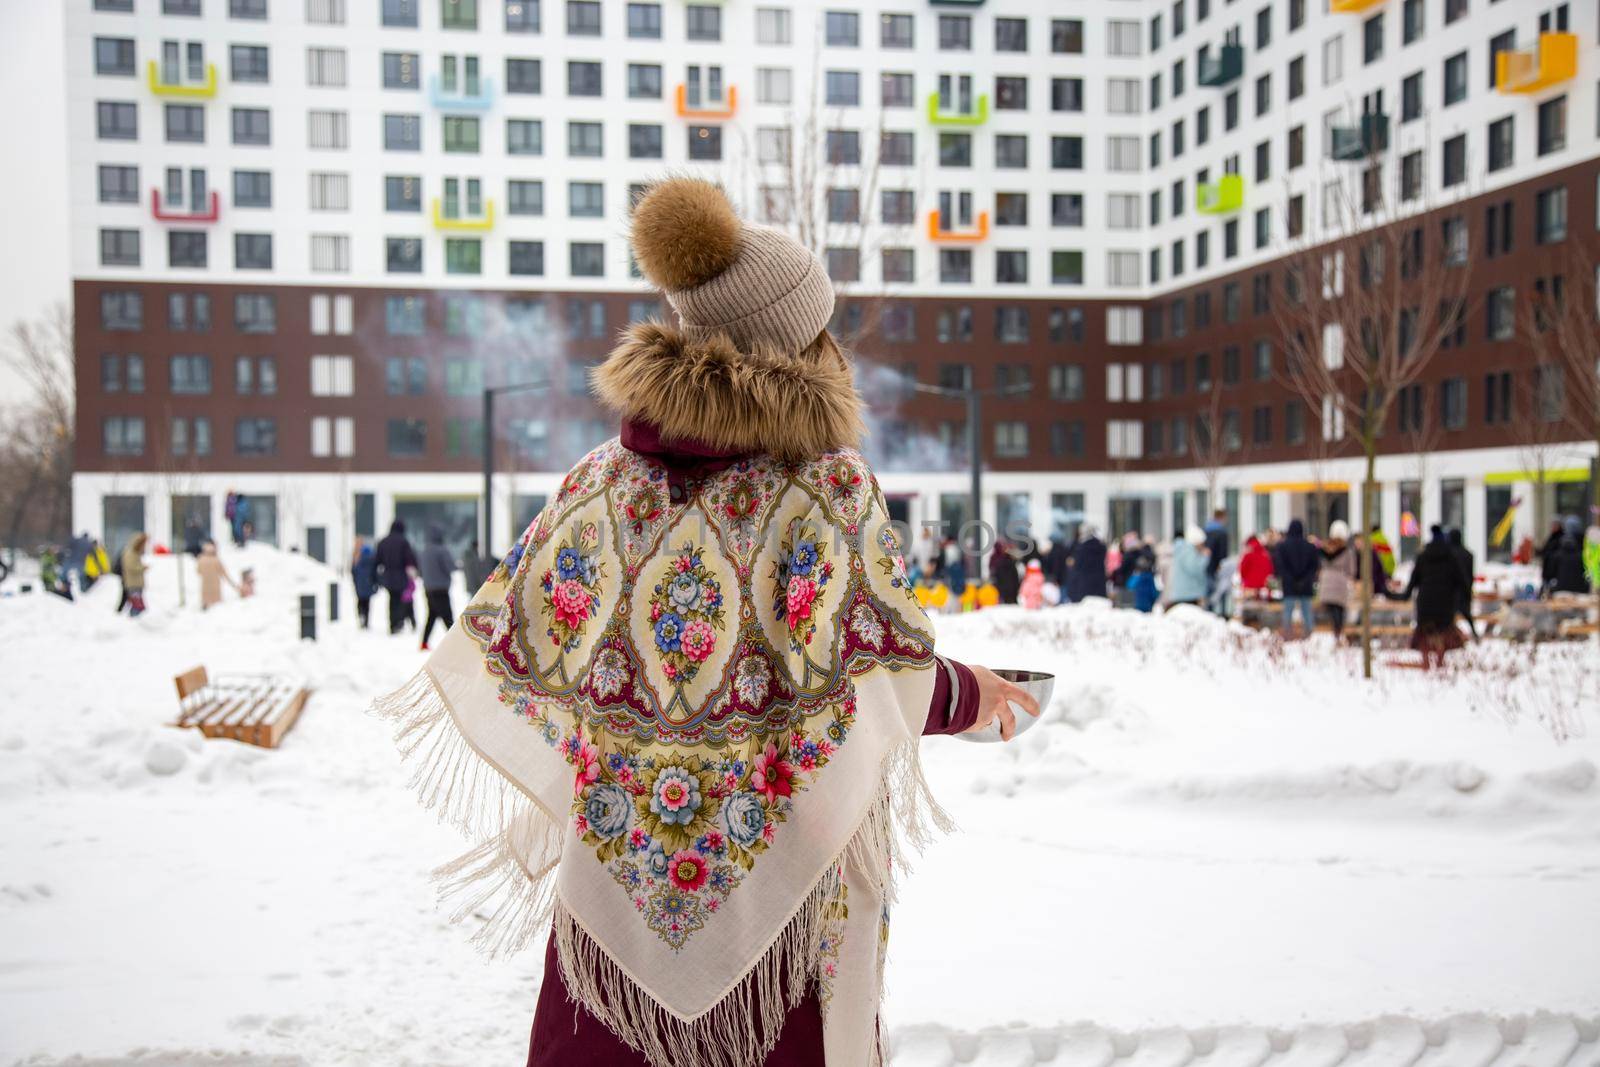 rear view of woman in traditional russian scarf at winter festival maslenitsa by Mariaprovector